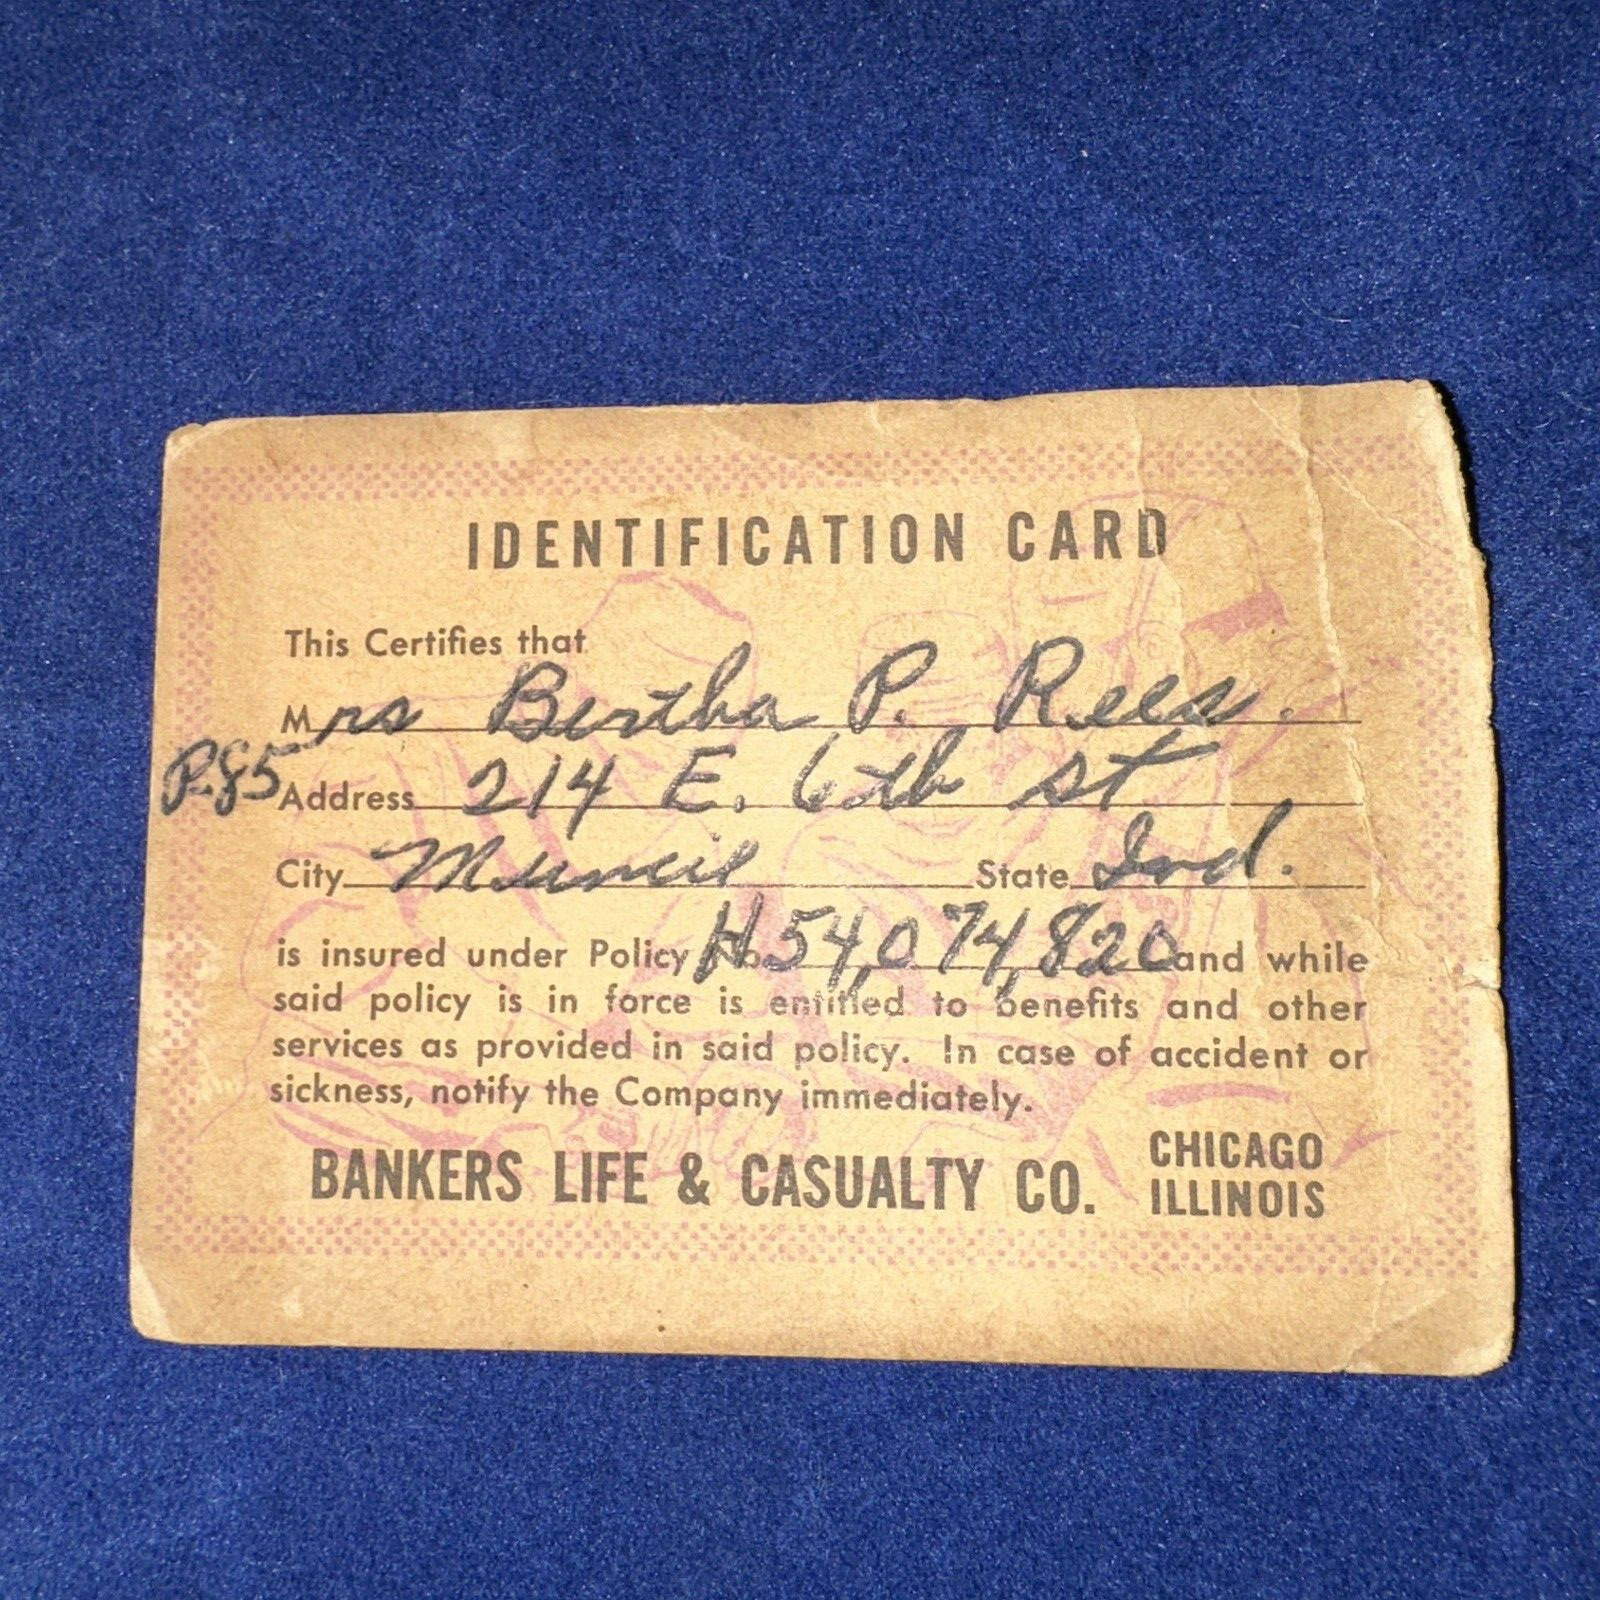 ID Card Bankers Life And Casualty - Bertha P Rees - Muncie, IND